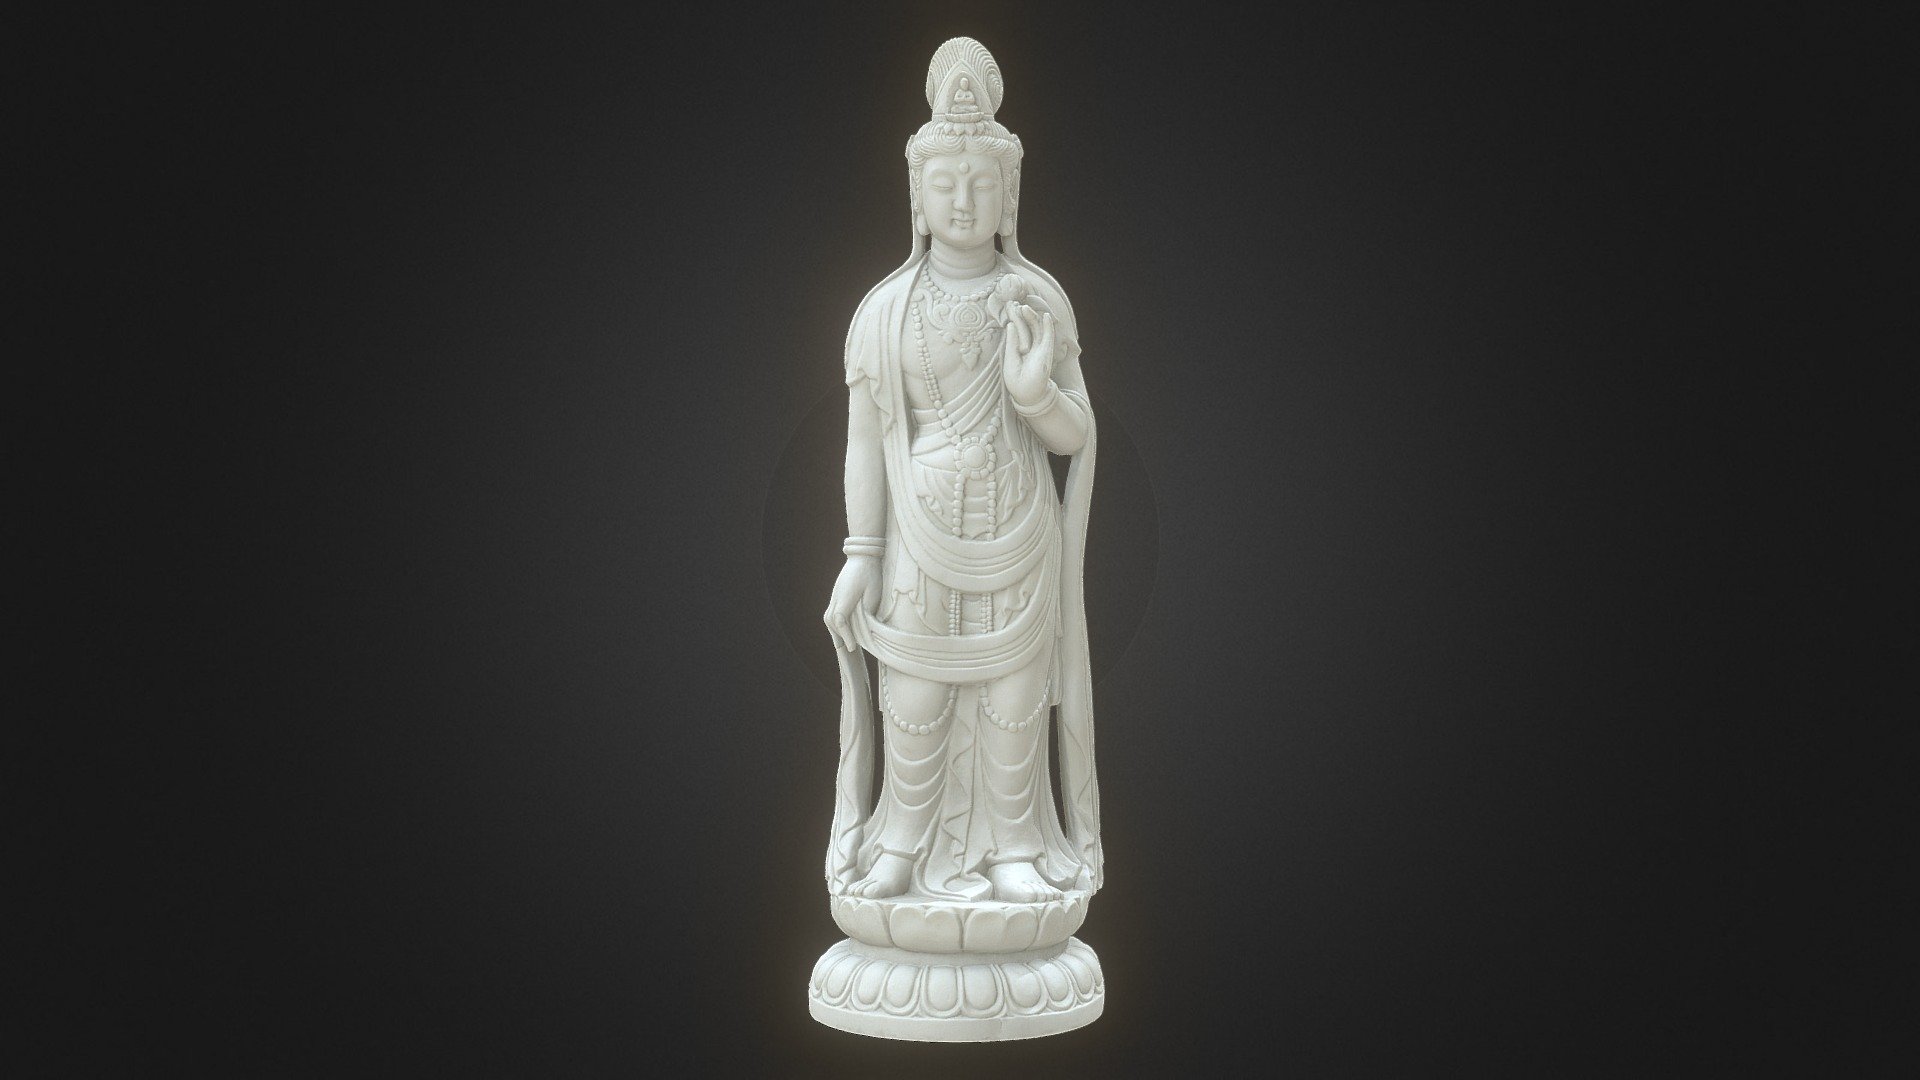 Guanyin is an East Asian bodhisattva associated with compassion as venerated by Mahayana Buddhists. She is commonly known as the &ldquo;Goddess of Mercy